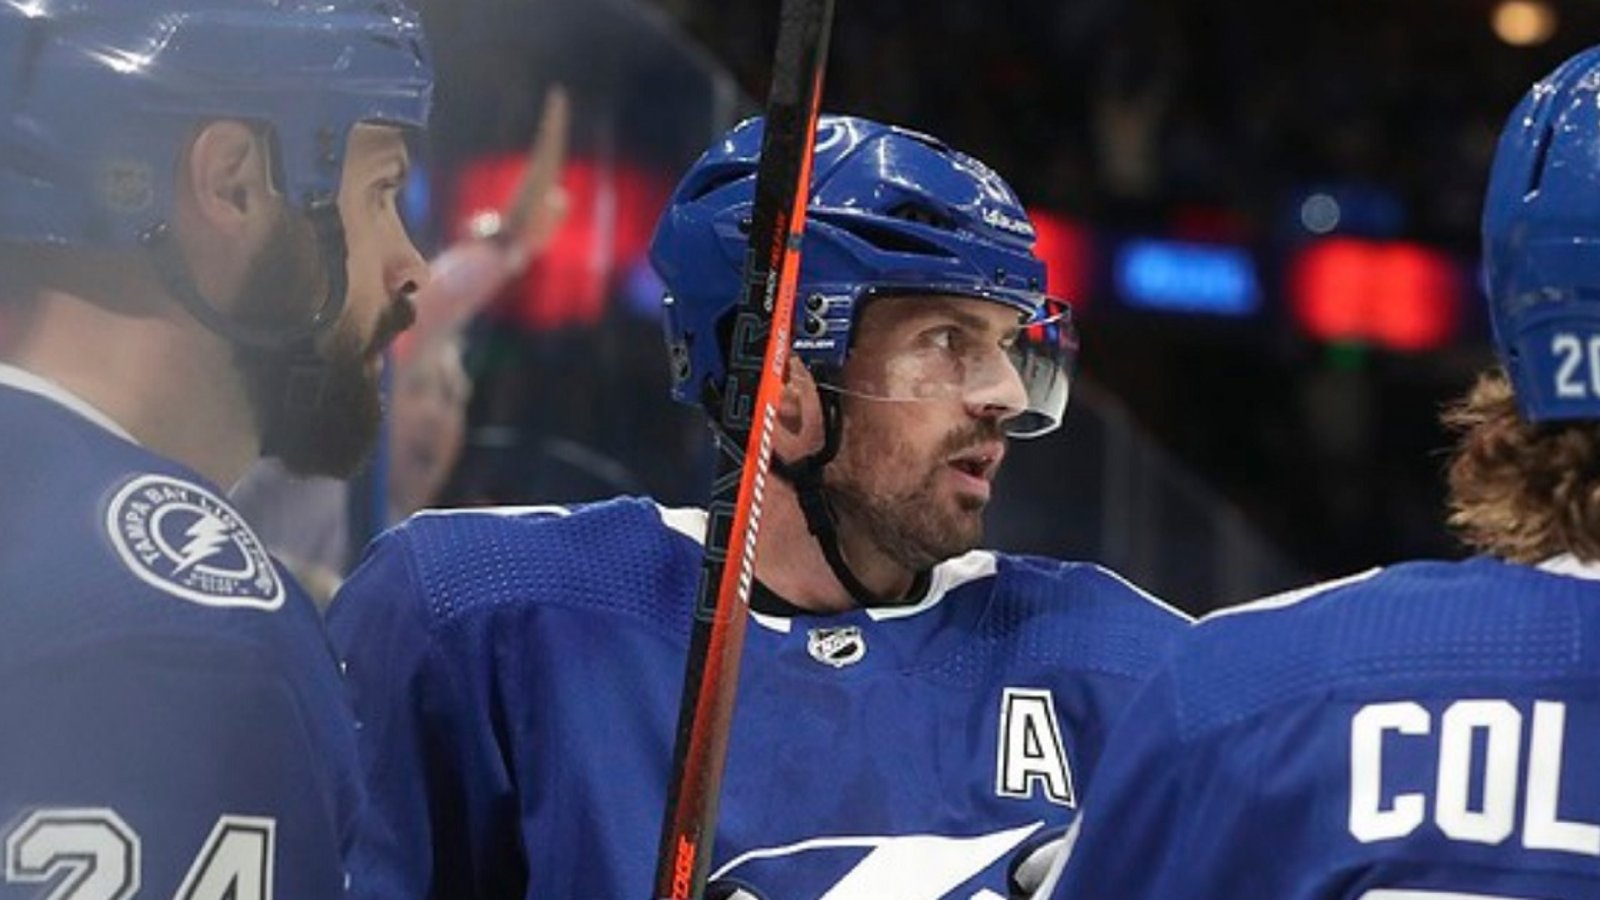 Alex Killorn reveals why the Lightning voted “no” on the NHL's proposal.